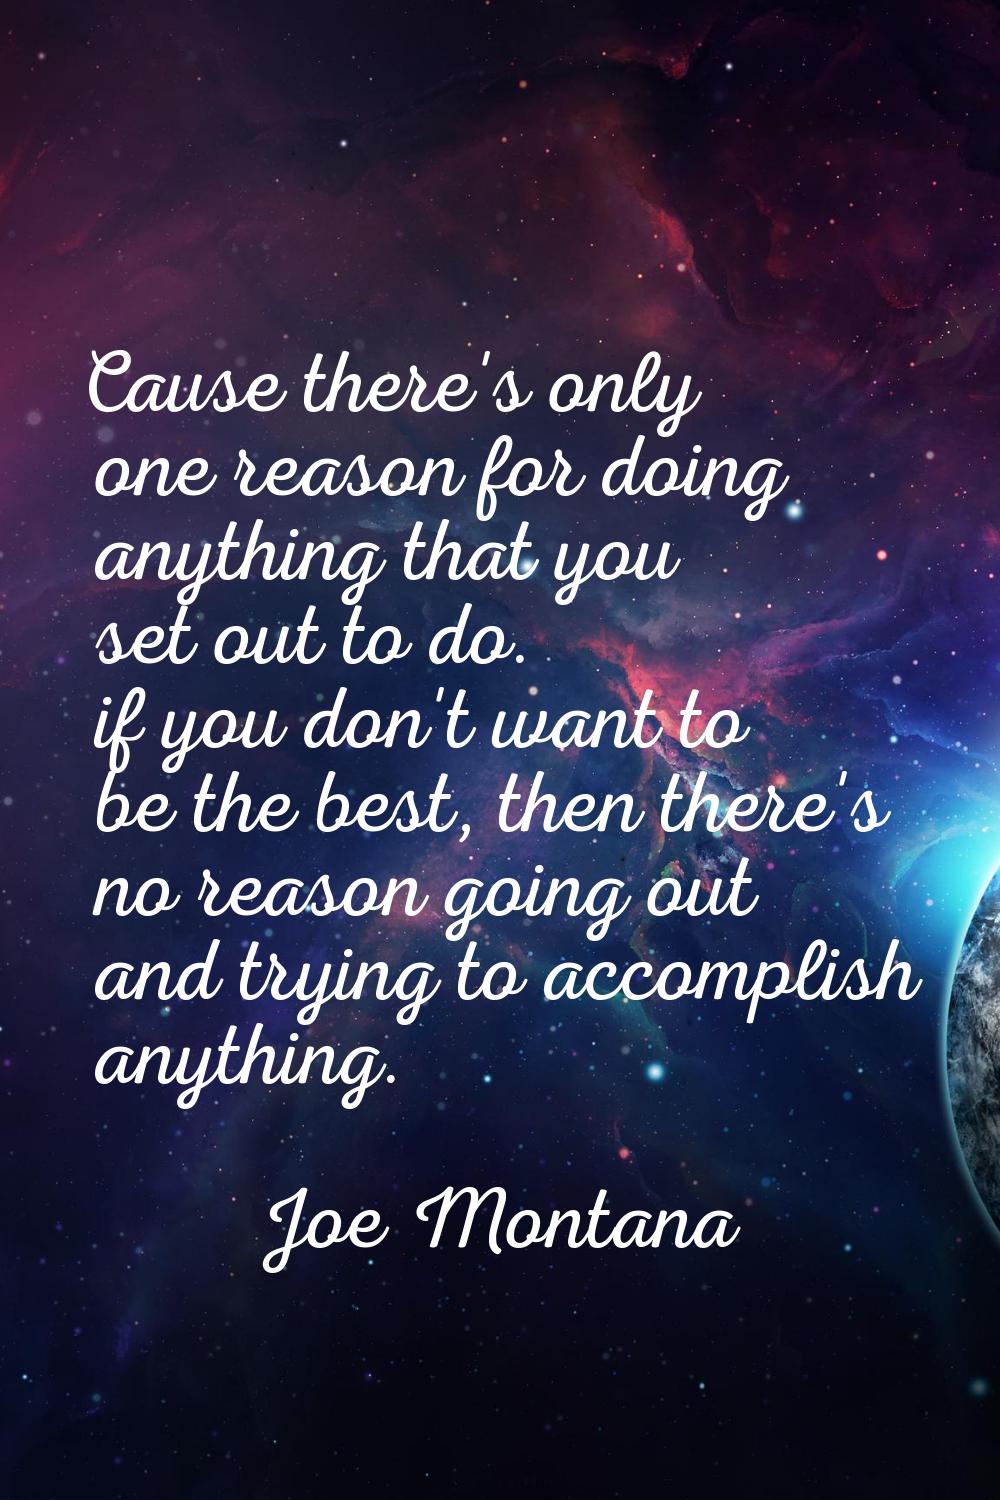 Cause there's only one reason for doing anything that you set out to do. if you don't want to be th